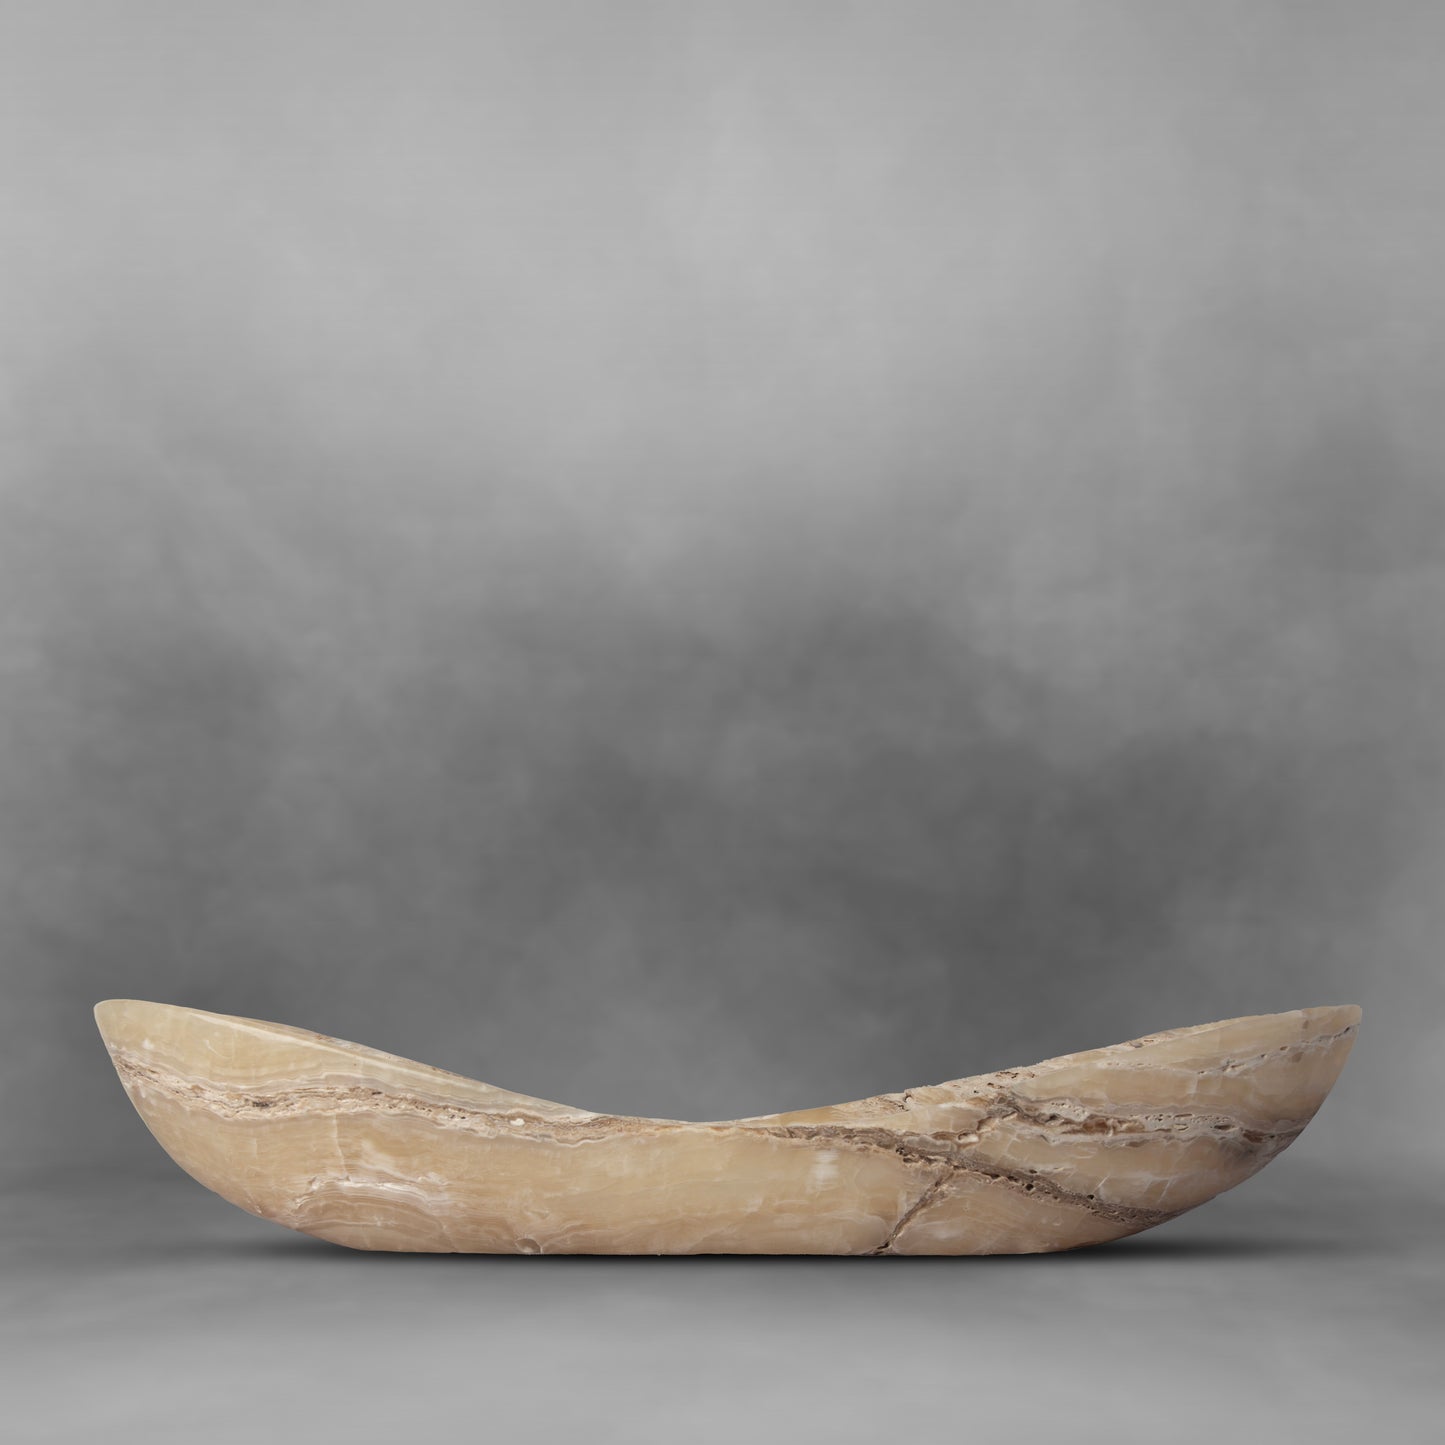 Rough Mineral, special large onyx canoe with unique design patterns